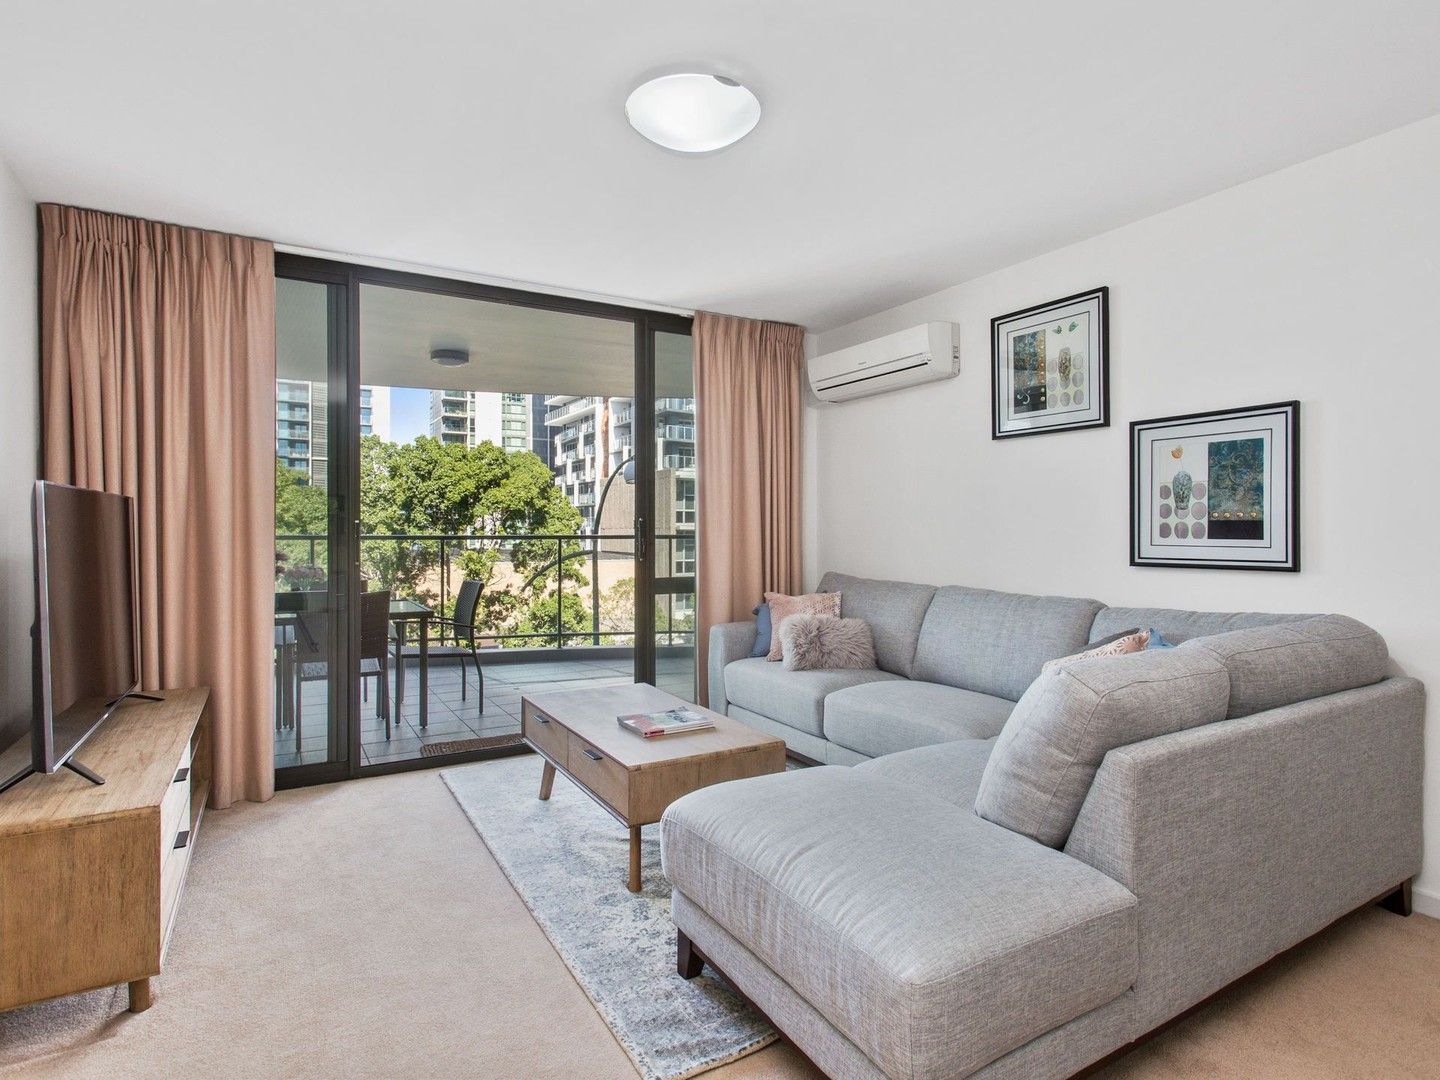 3 bedrooms Apartment / Unit / Flat in 39/188 Adelaide Terrace EAST PERTH WA, 6004